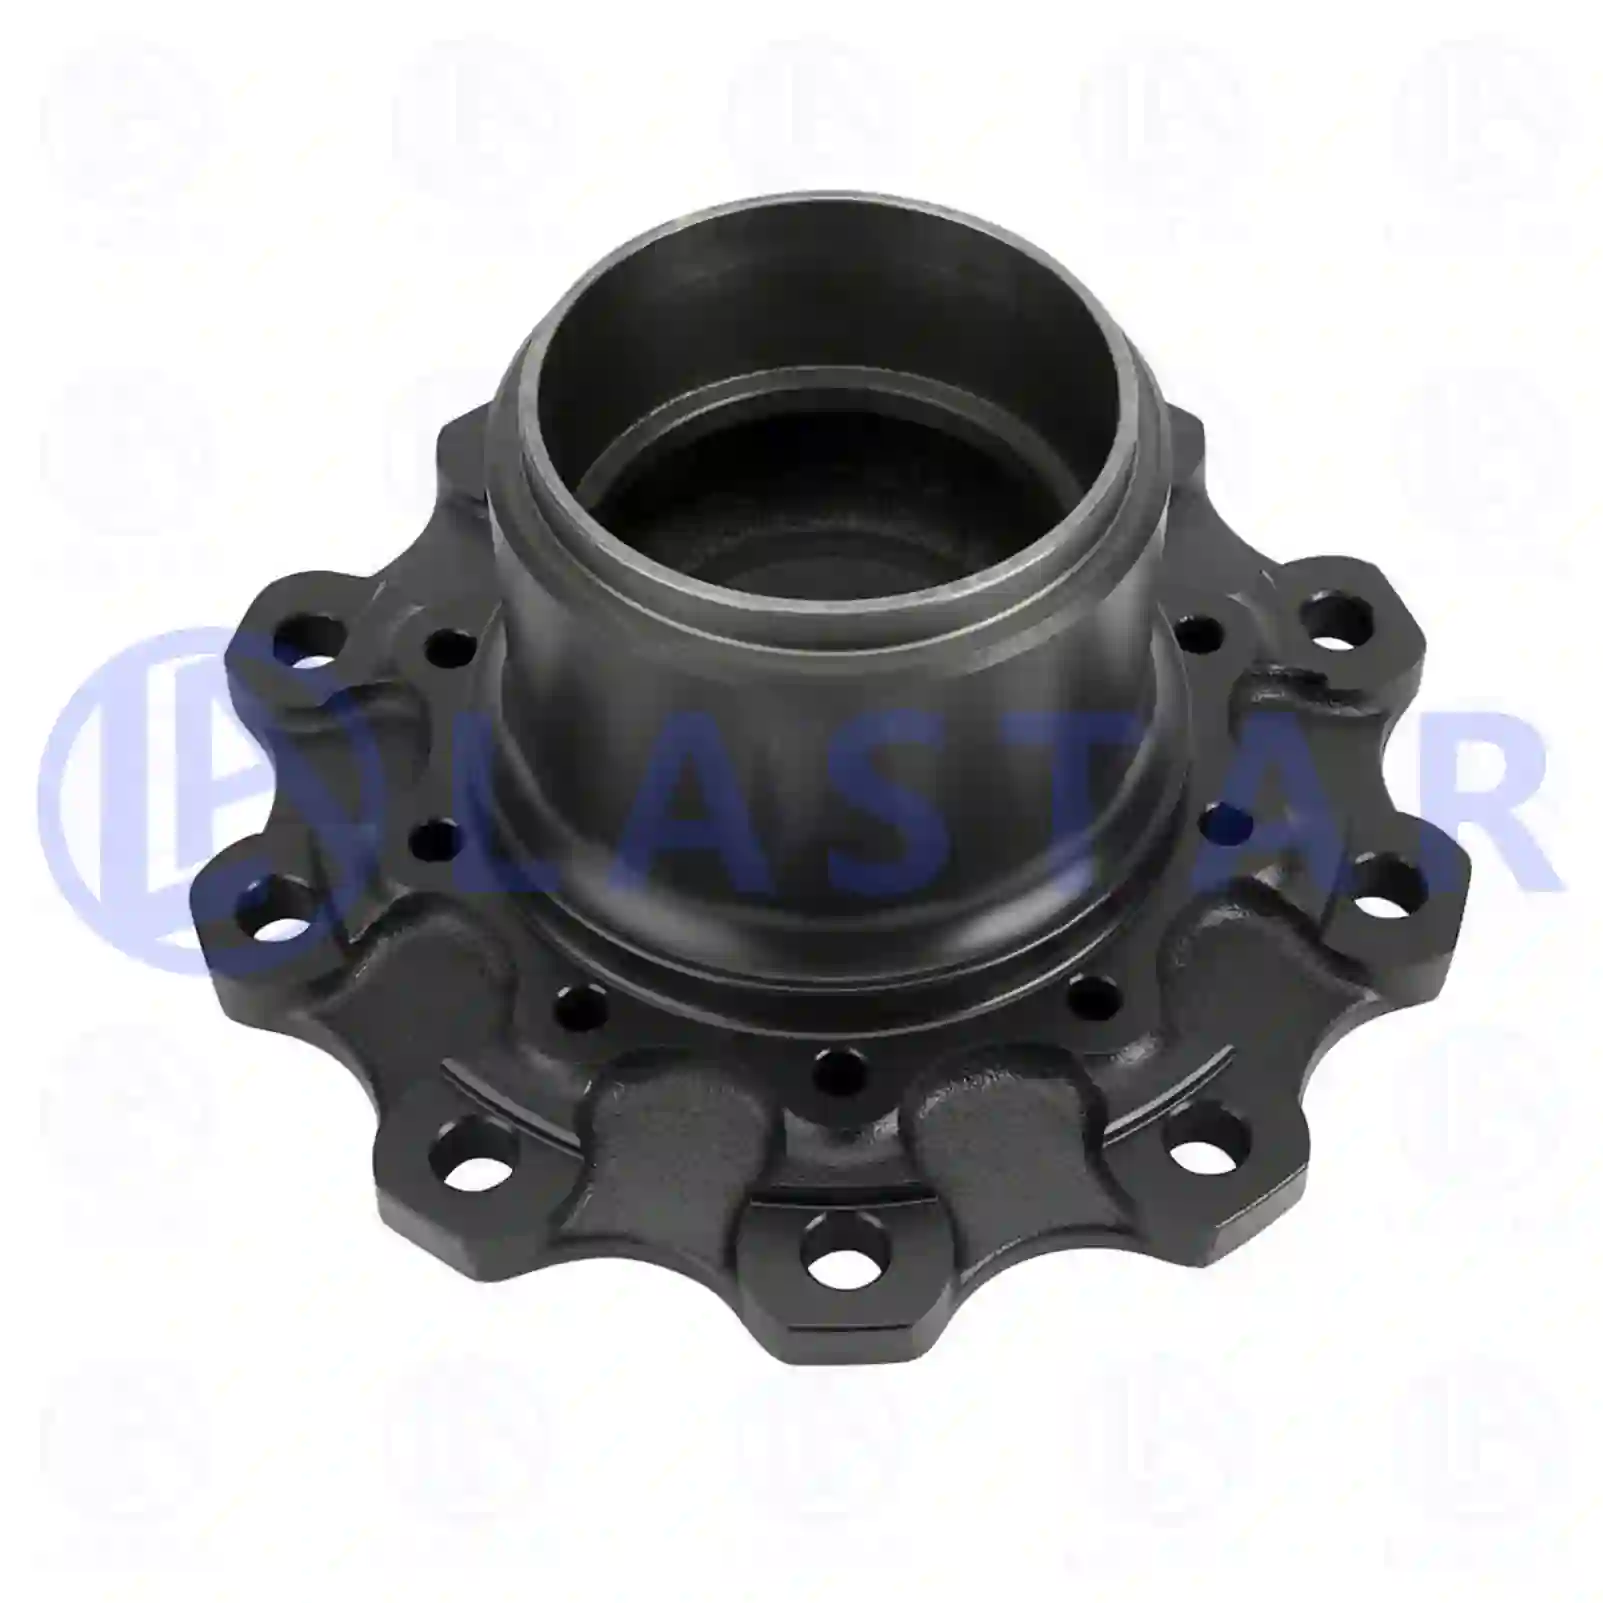 Wheel hub, with bearing, 77726331, 9423340201S, 9423340701S, 9423341201S, 9423341501S, ZG30209-0008, , , ||  77726331 Lastar Spare Part | Truck Spare Parts, Auotomotive Spare Parts Wheel hub, with bearing, 77726331, 9423340201S, 9423340701S, 9423341201S, 9423341501S, ZG30209-0008, , , ||  77726331 Lastar Spare Part | Truck Spare Parts, Auotomotive Spare Parts